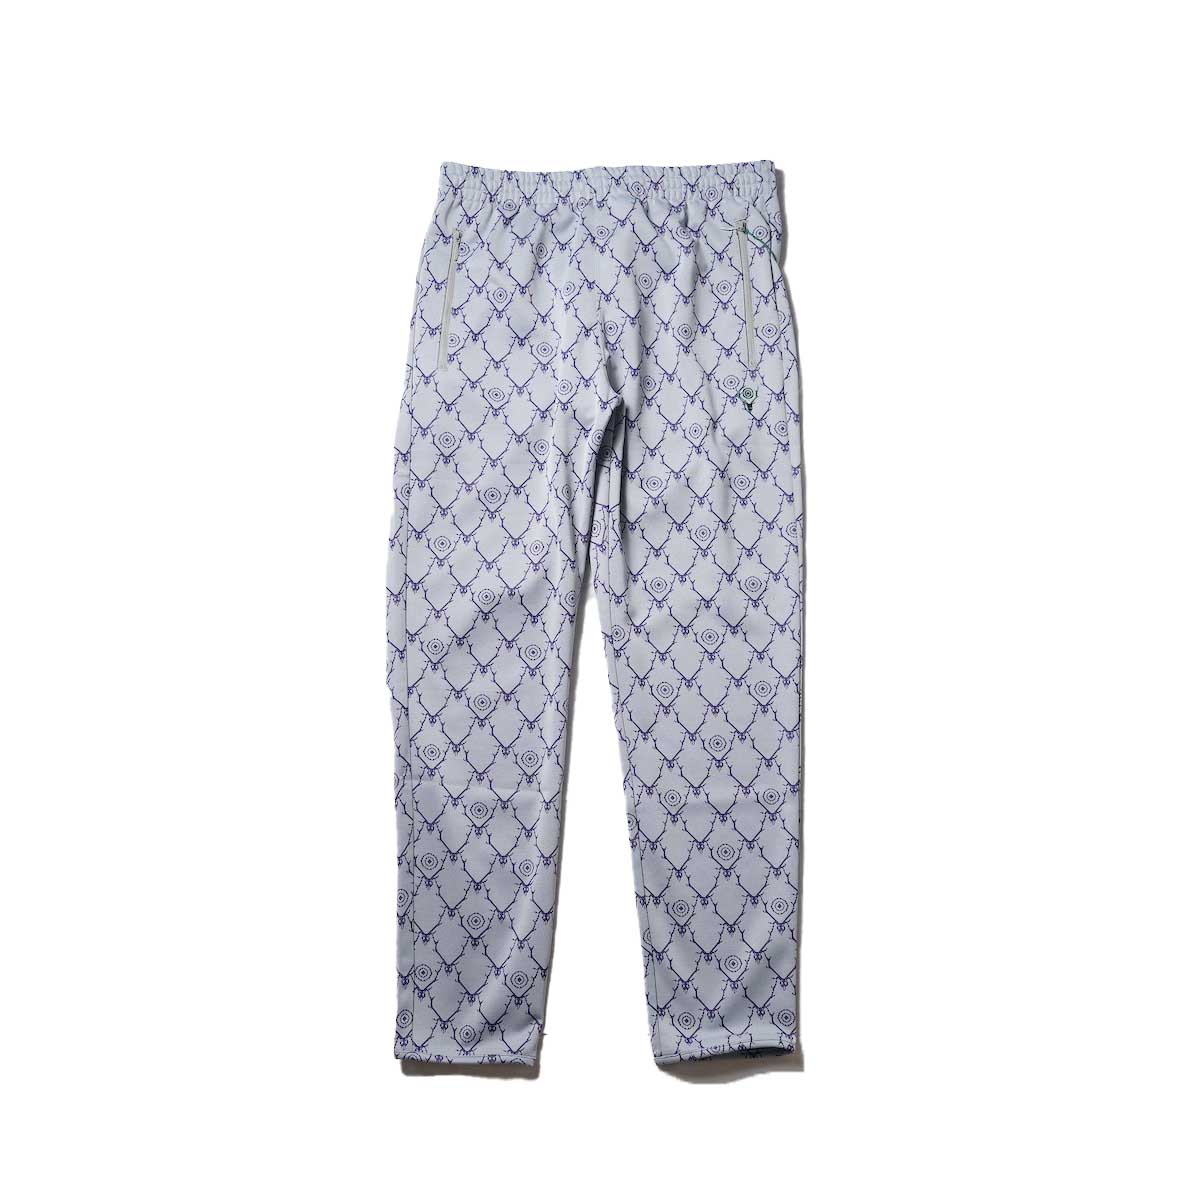 South2 West8 / TRAINER PANT - POLY JQ. / (Gray)